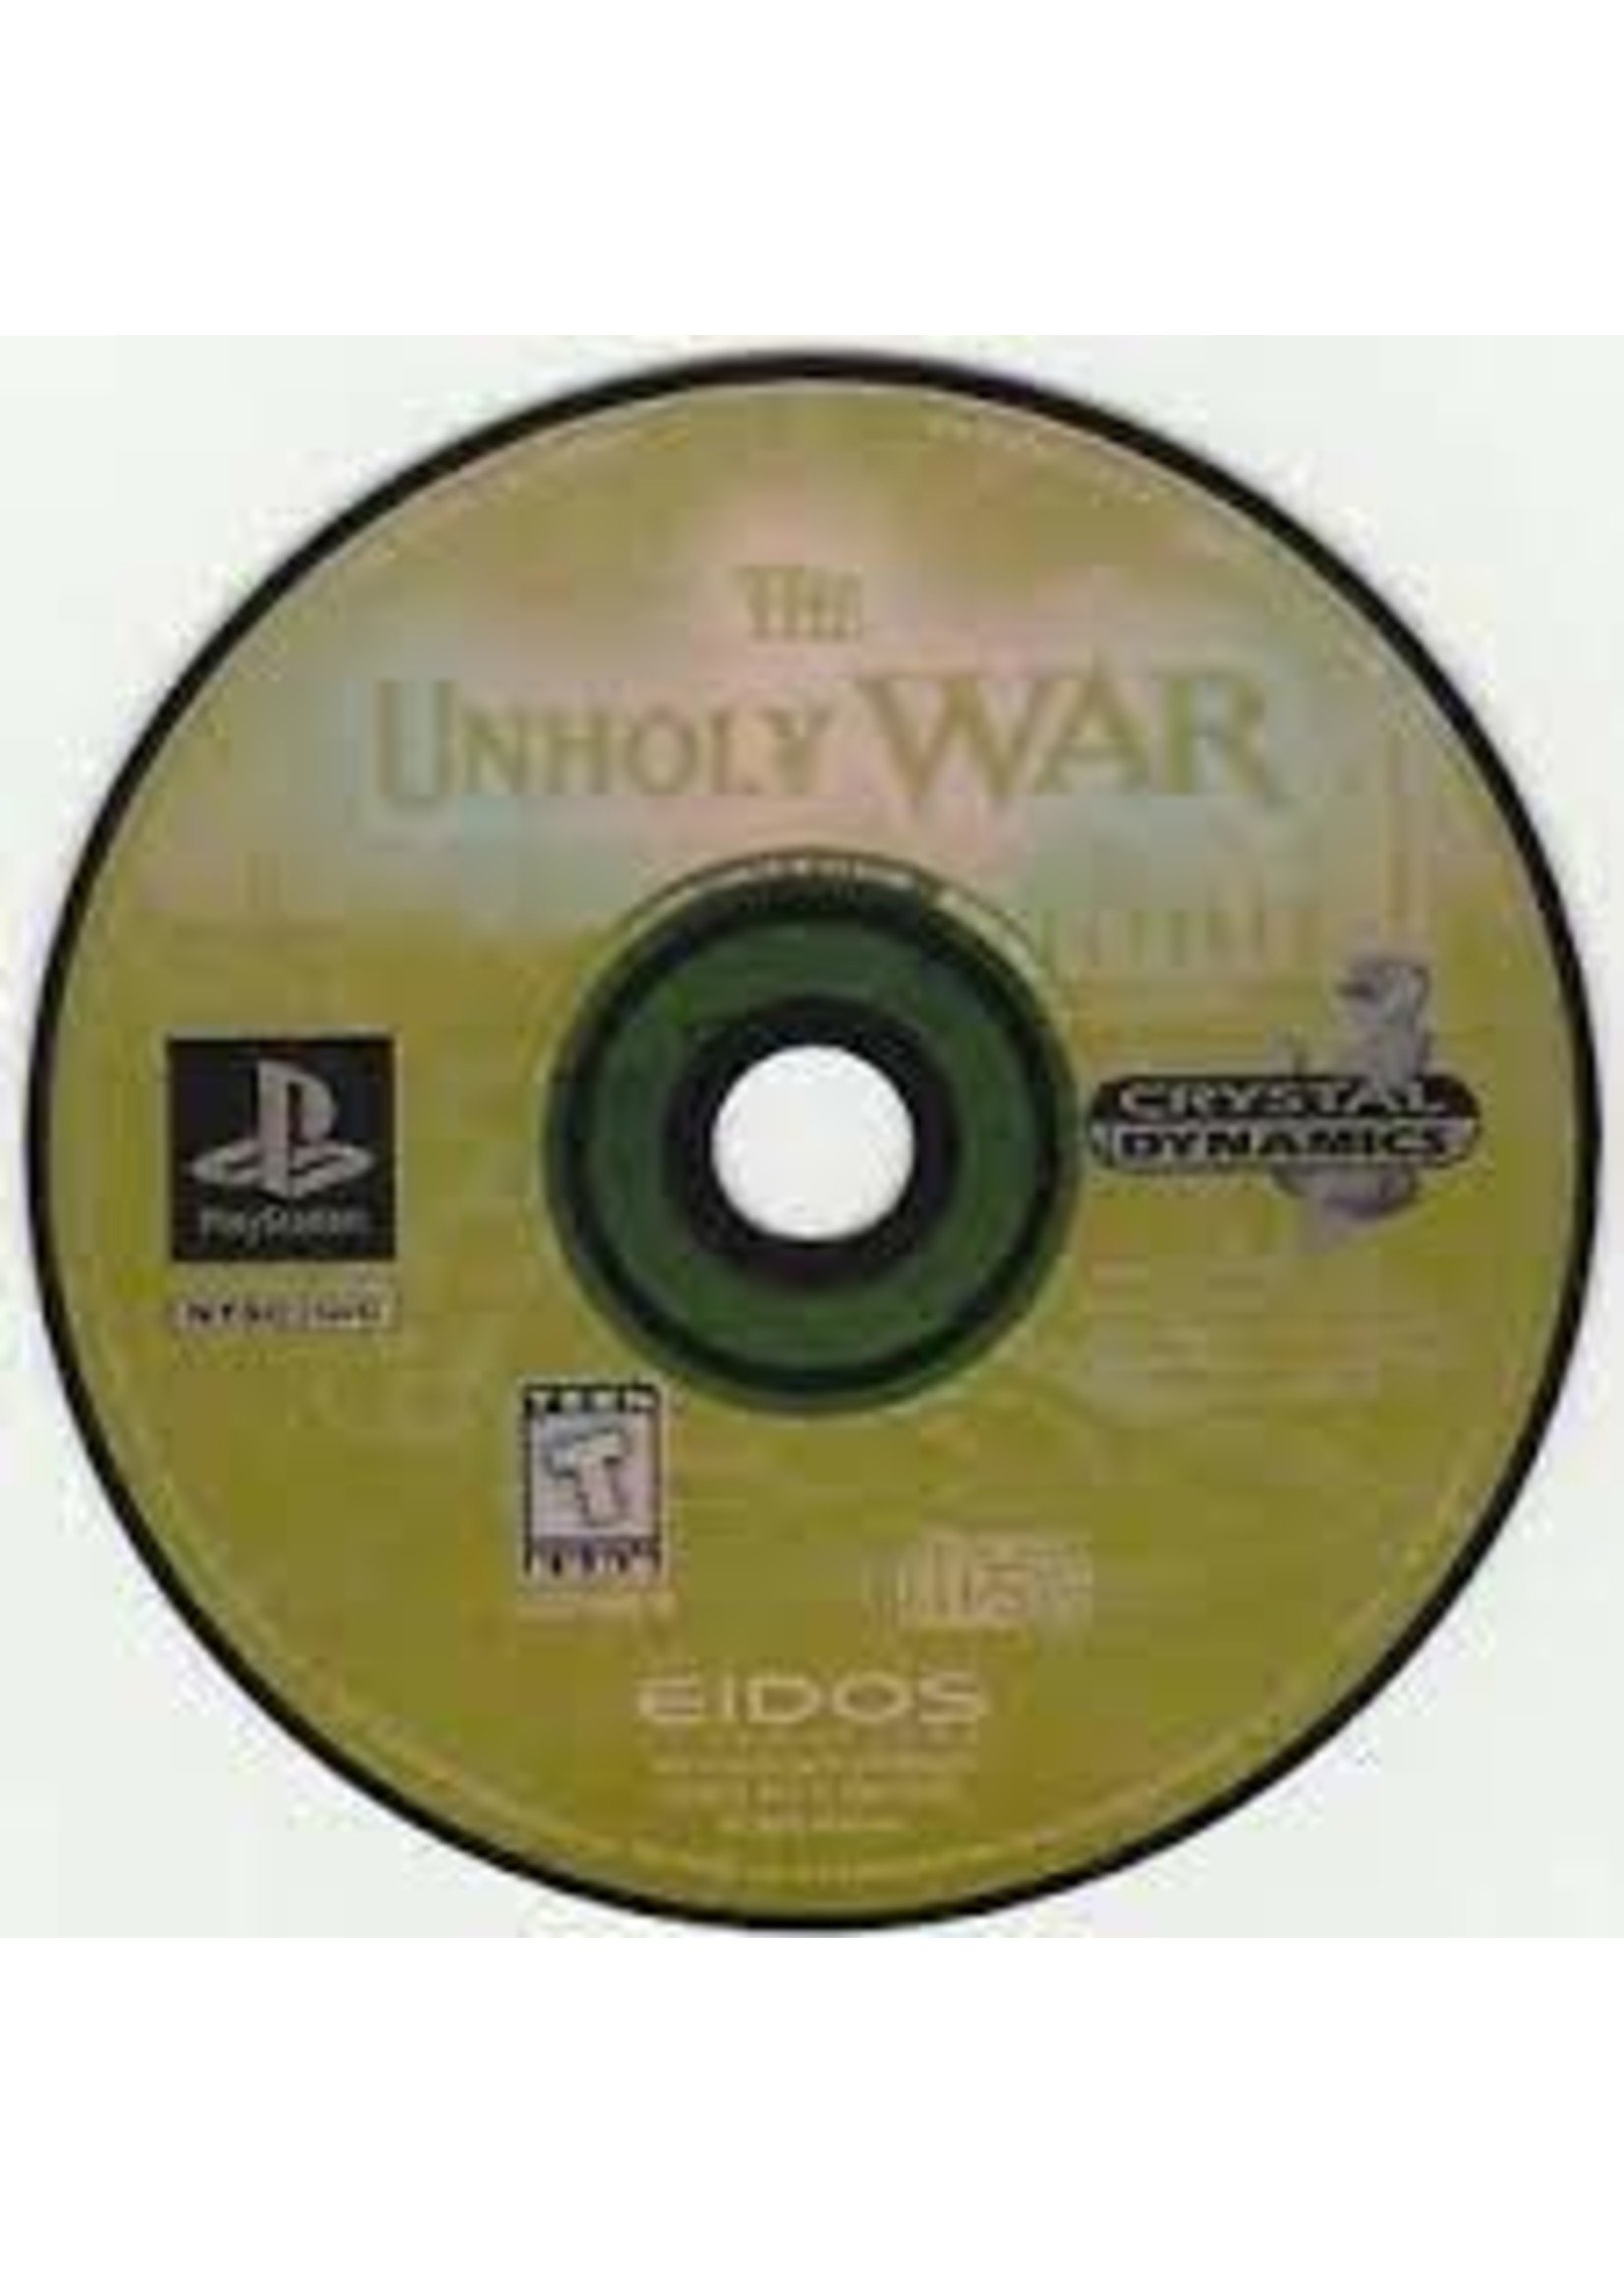 Sony Playstation 1 (PS1) Unholy War, The - Print